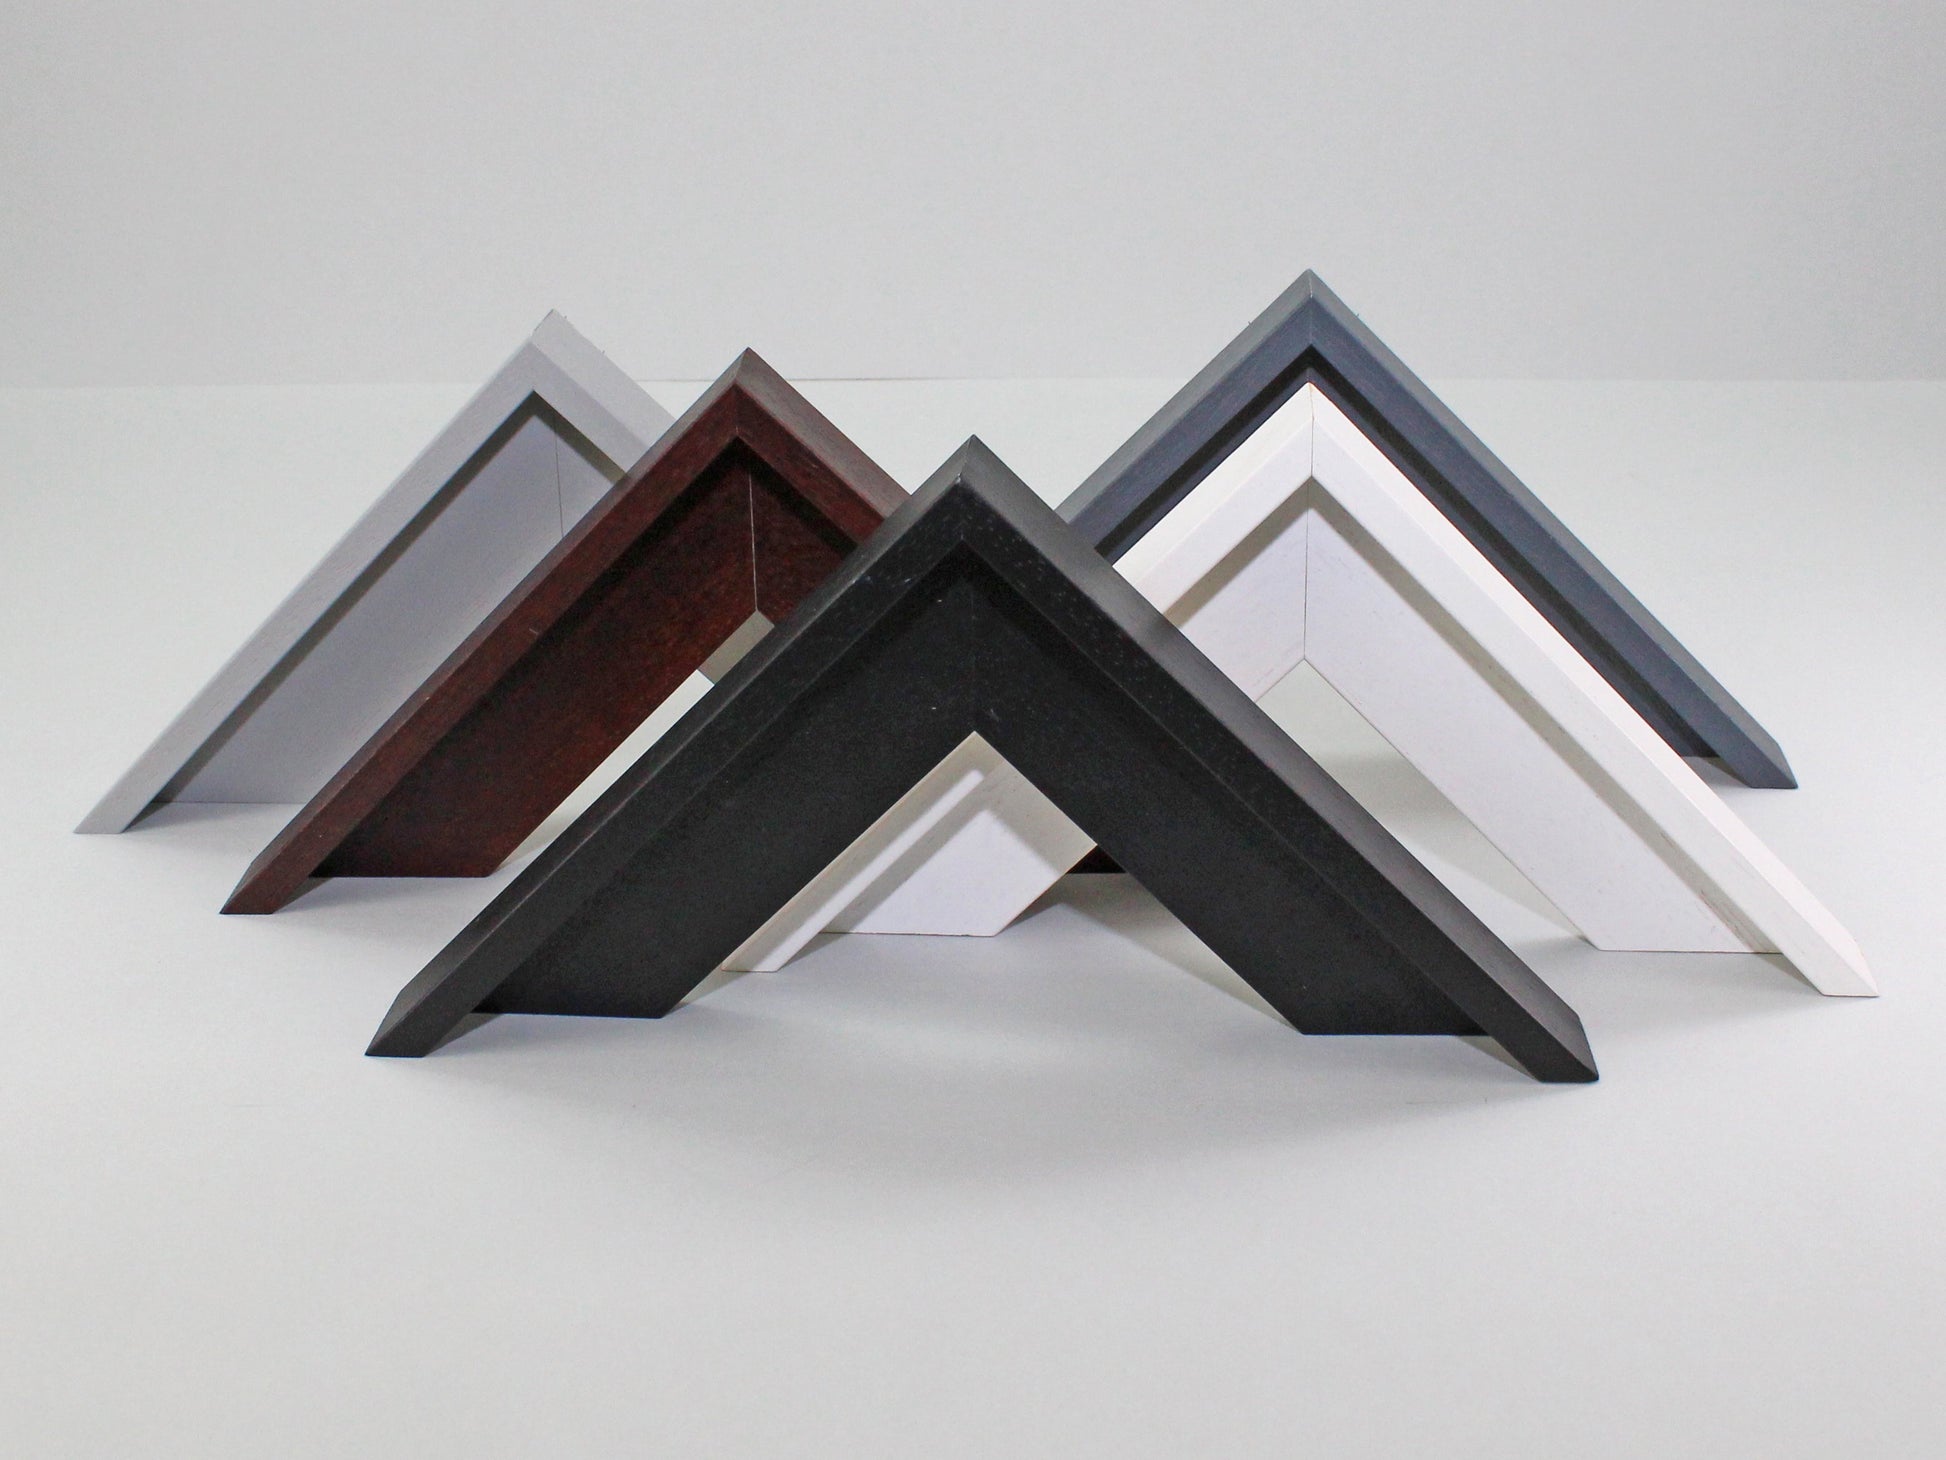 Made To Measure Tray Frames-22mm Canvases - PhotoFramesandMore - Wooden Picture Frames